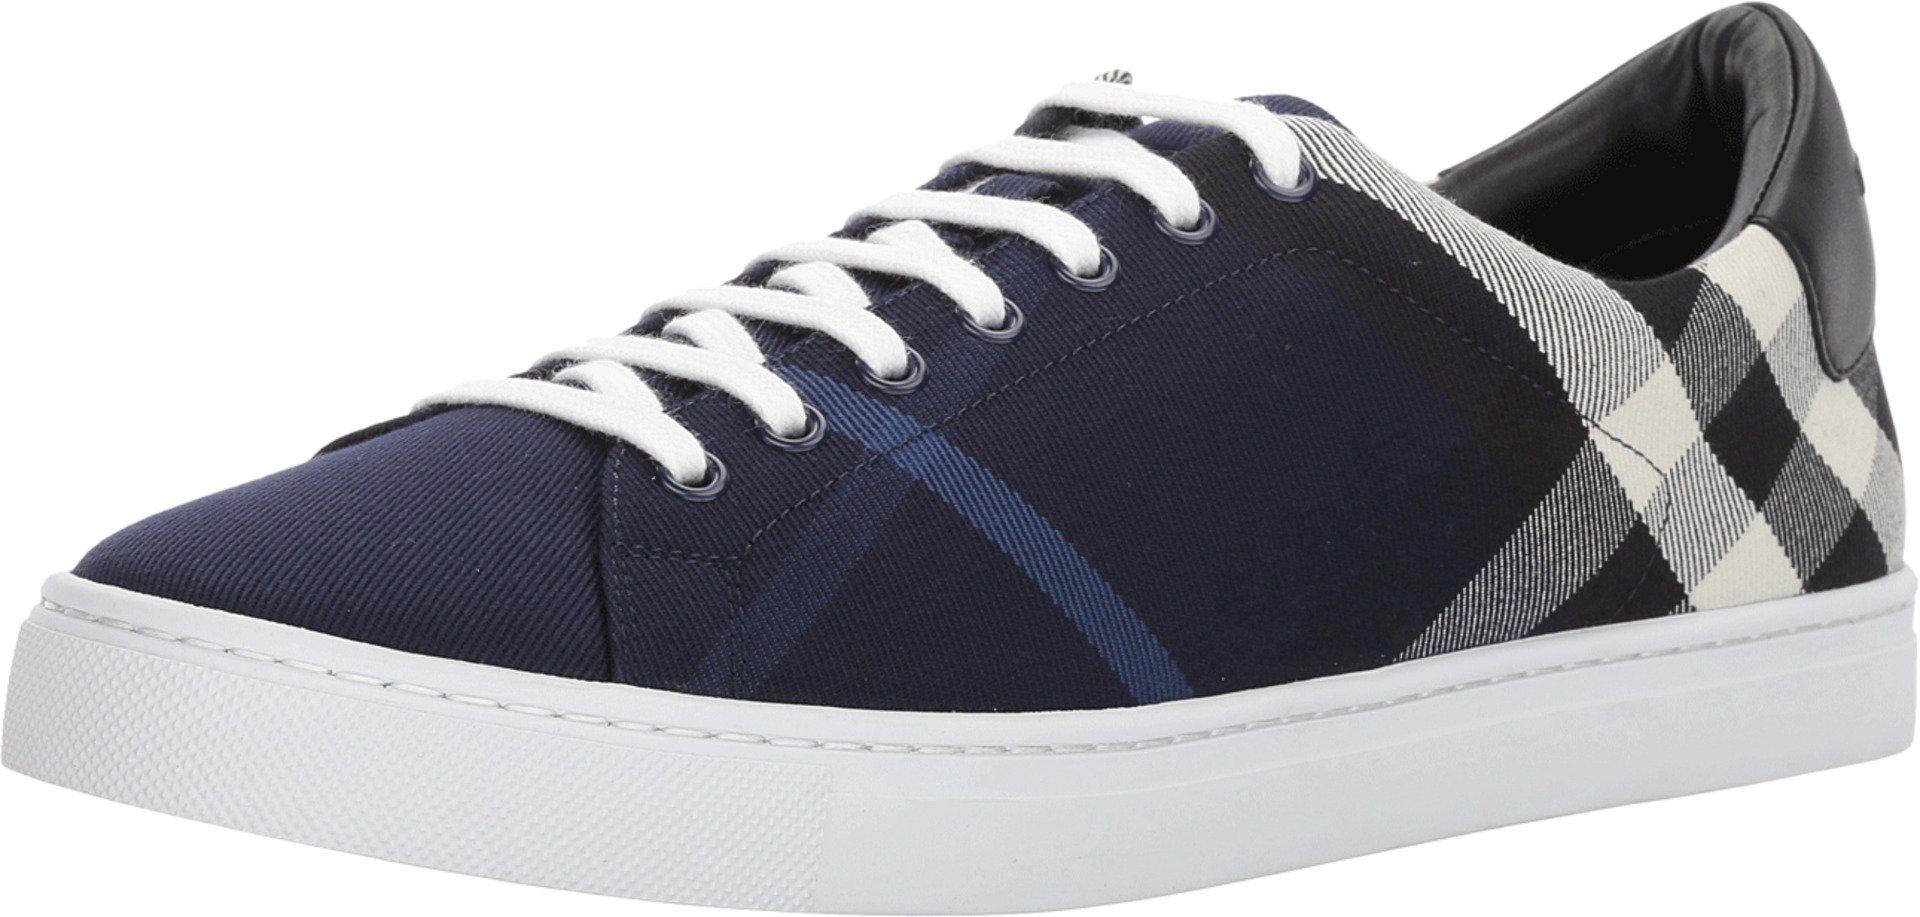 Burberry Cotton Albert House Check Low Top in Navy (Blue) for Men - Lyst